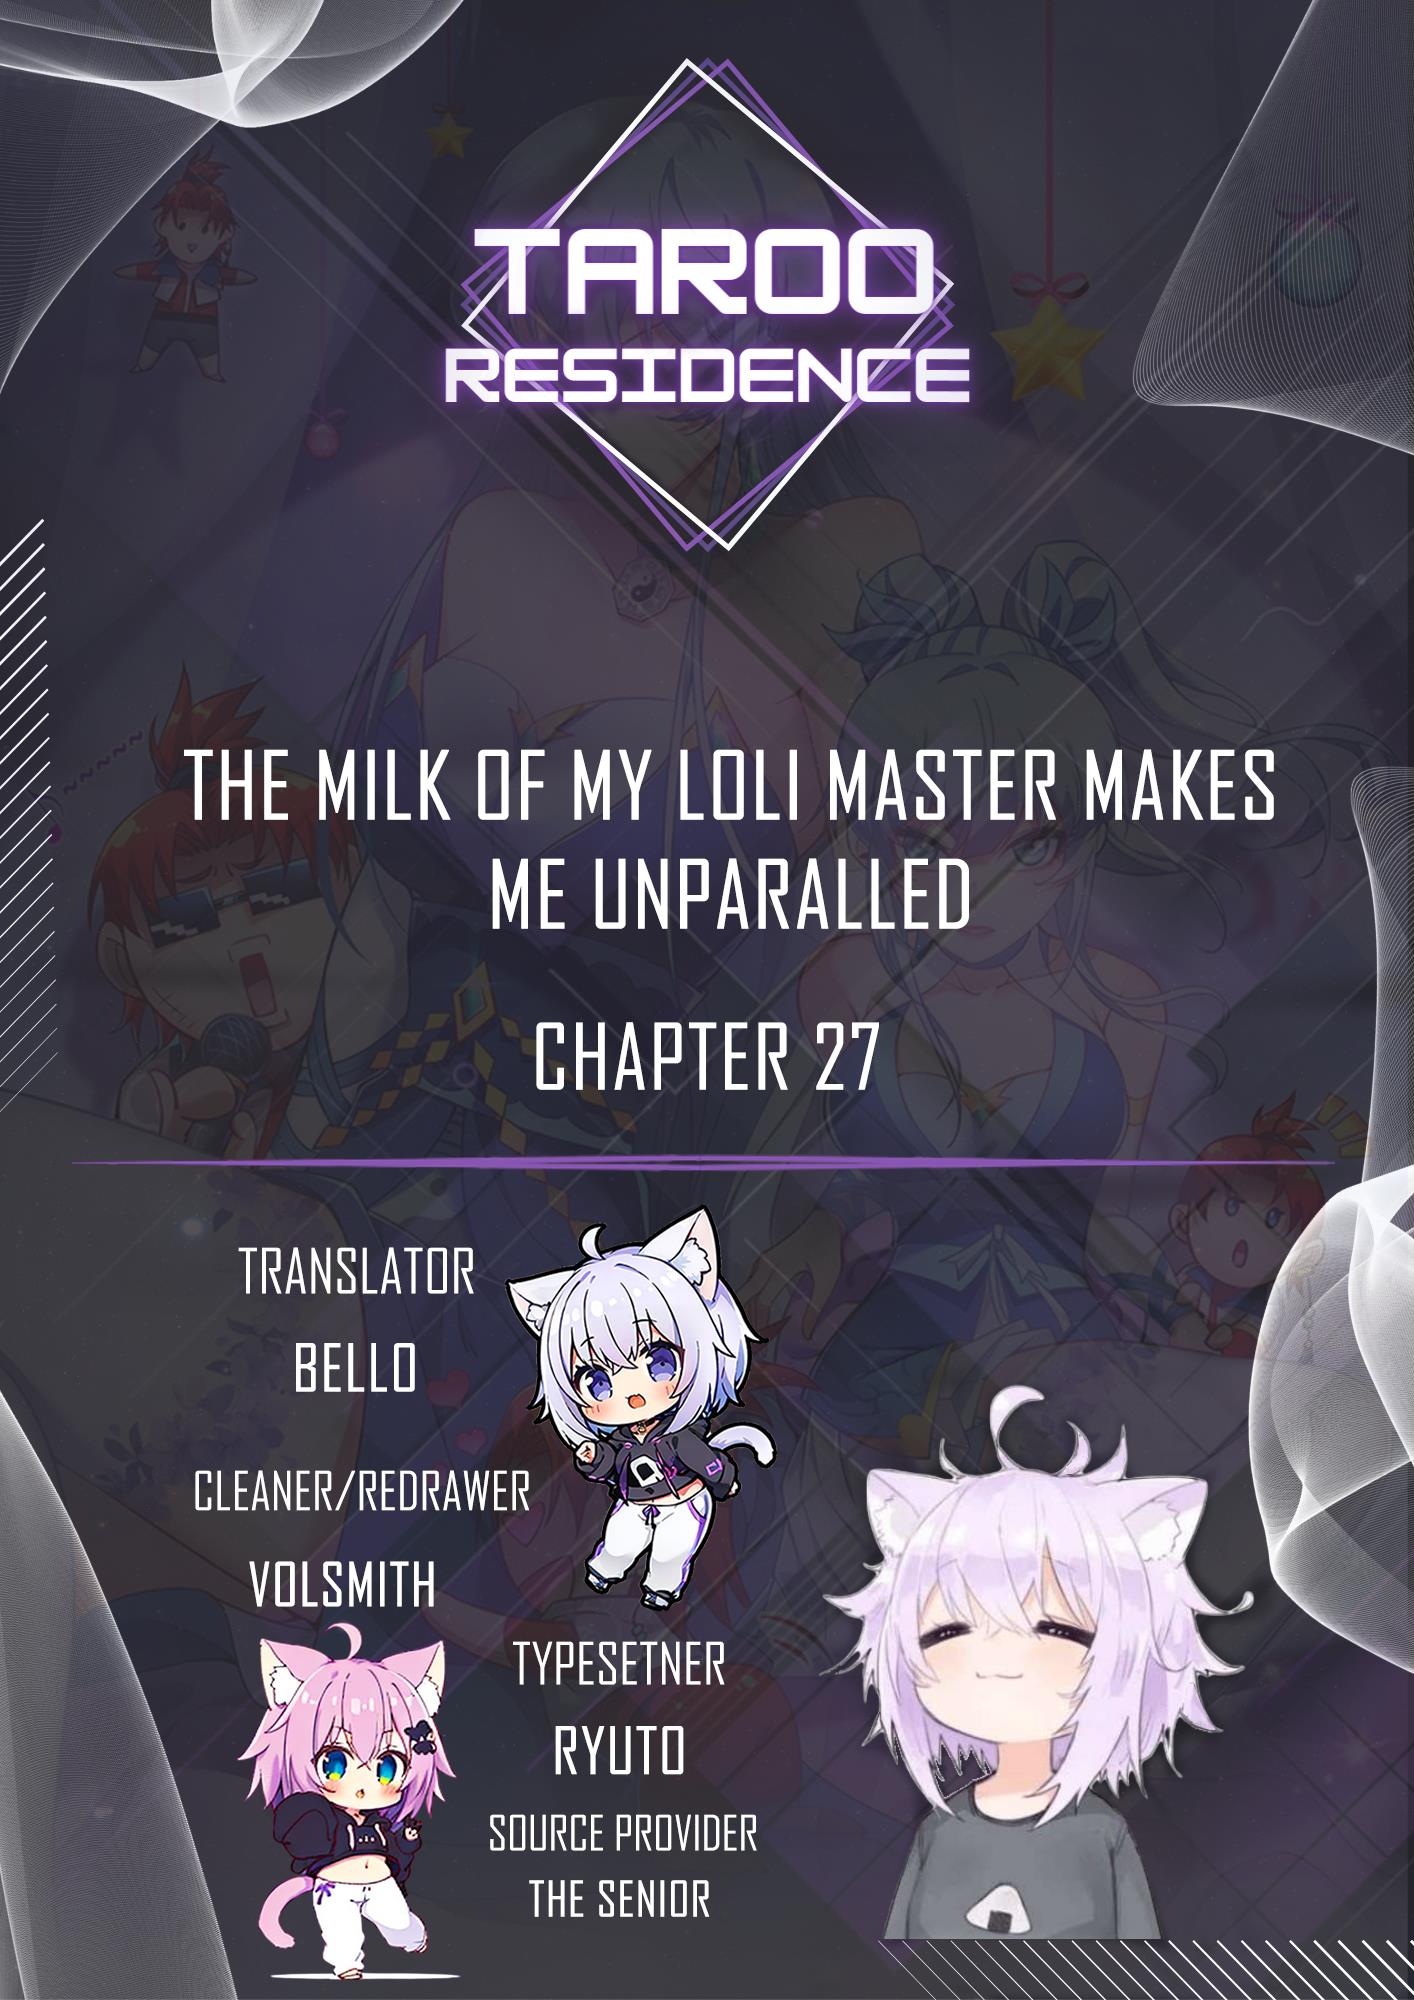 A Mouthful Of My Loli Master's Milk Makes Me Unparalleled - Page 1